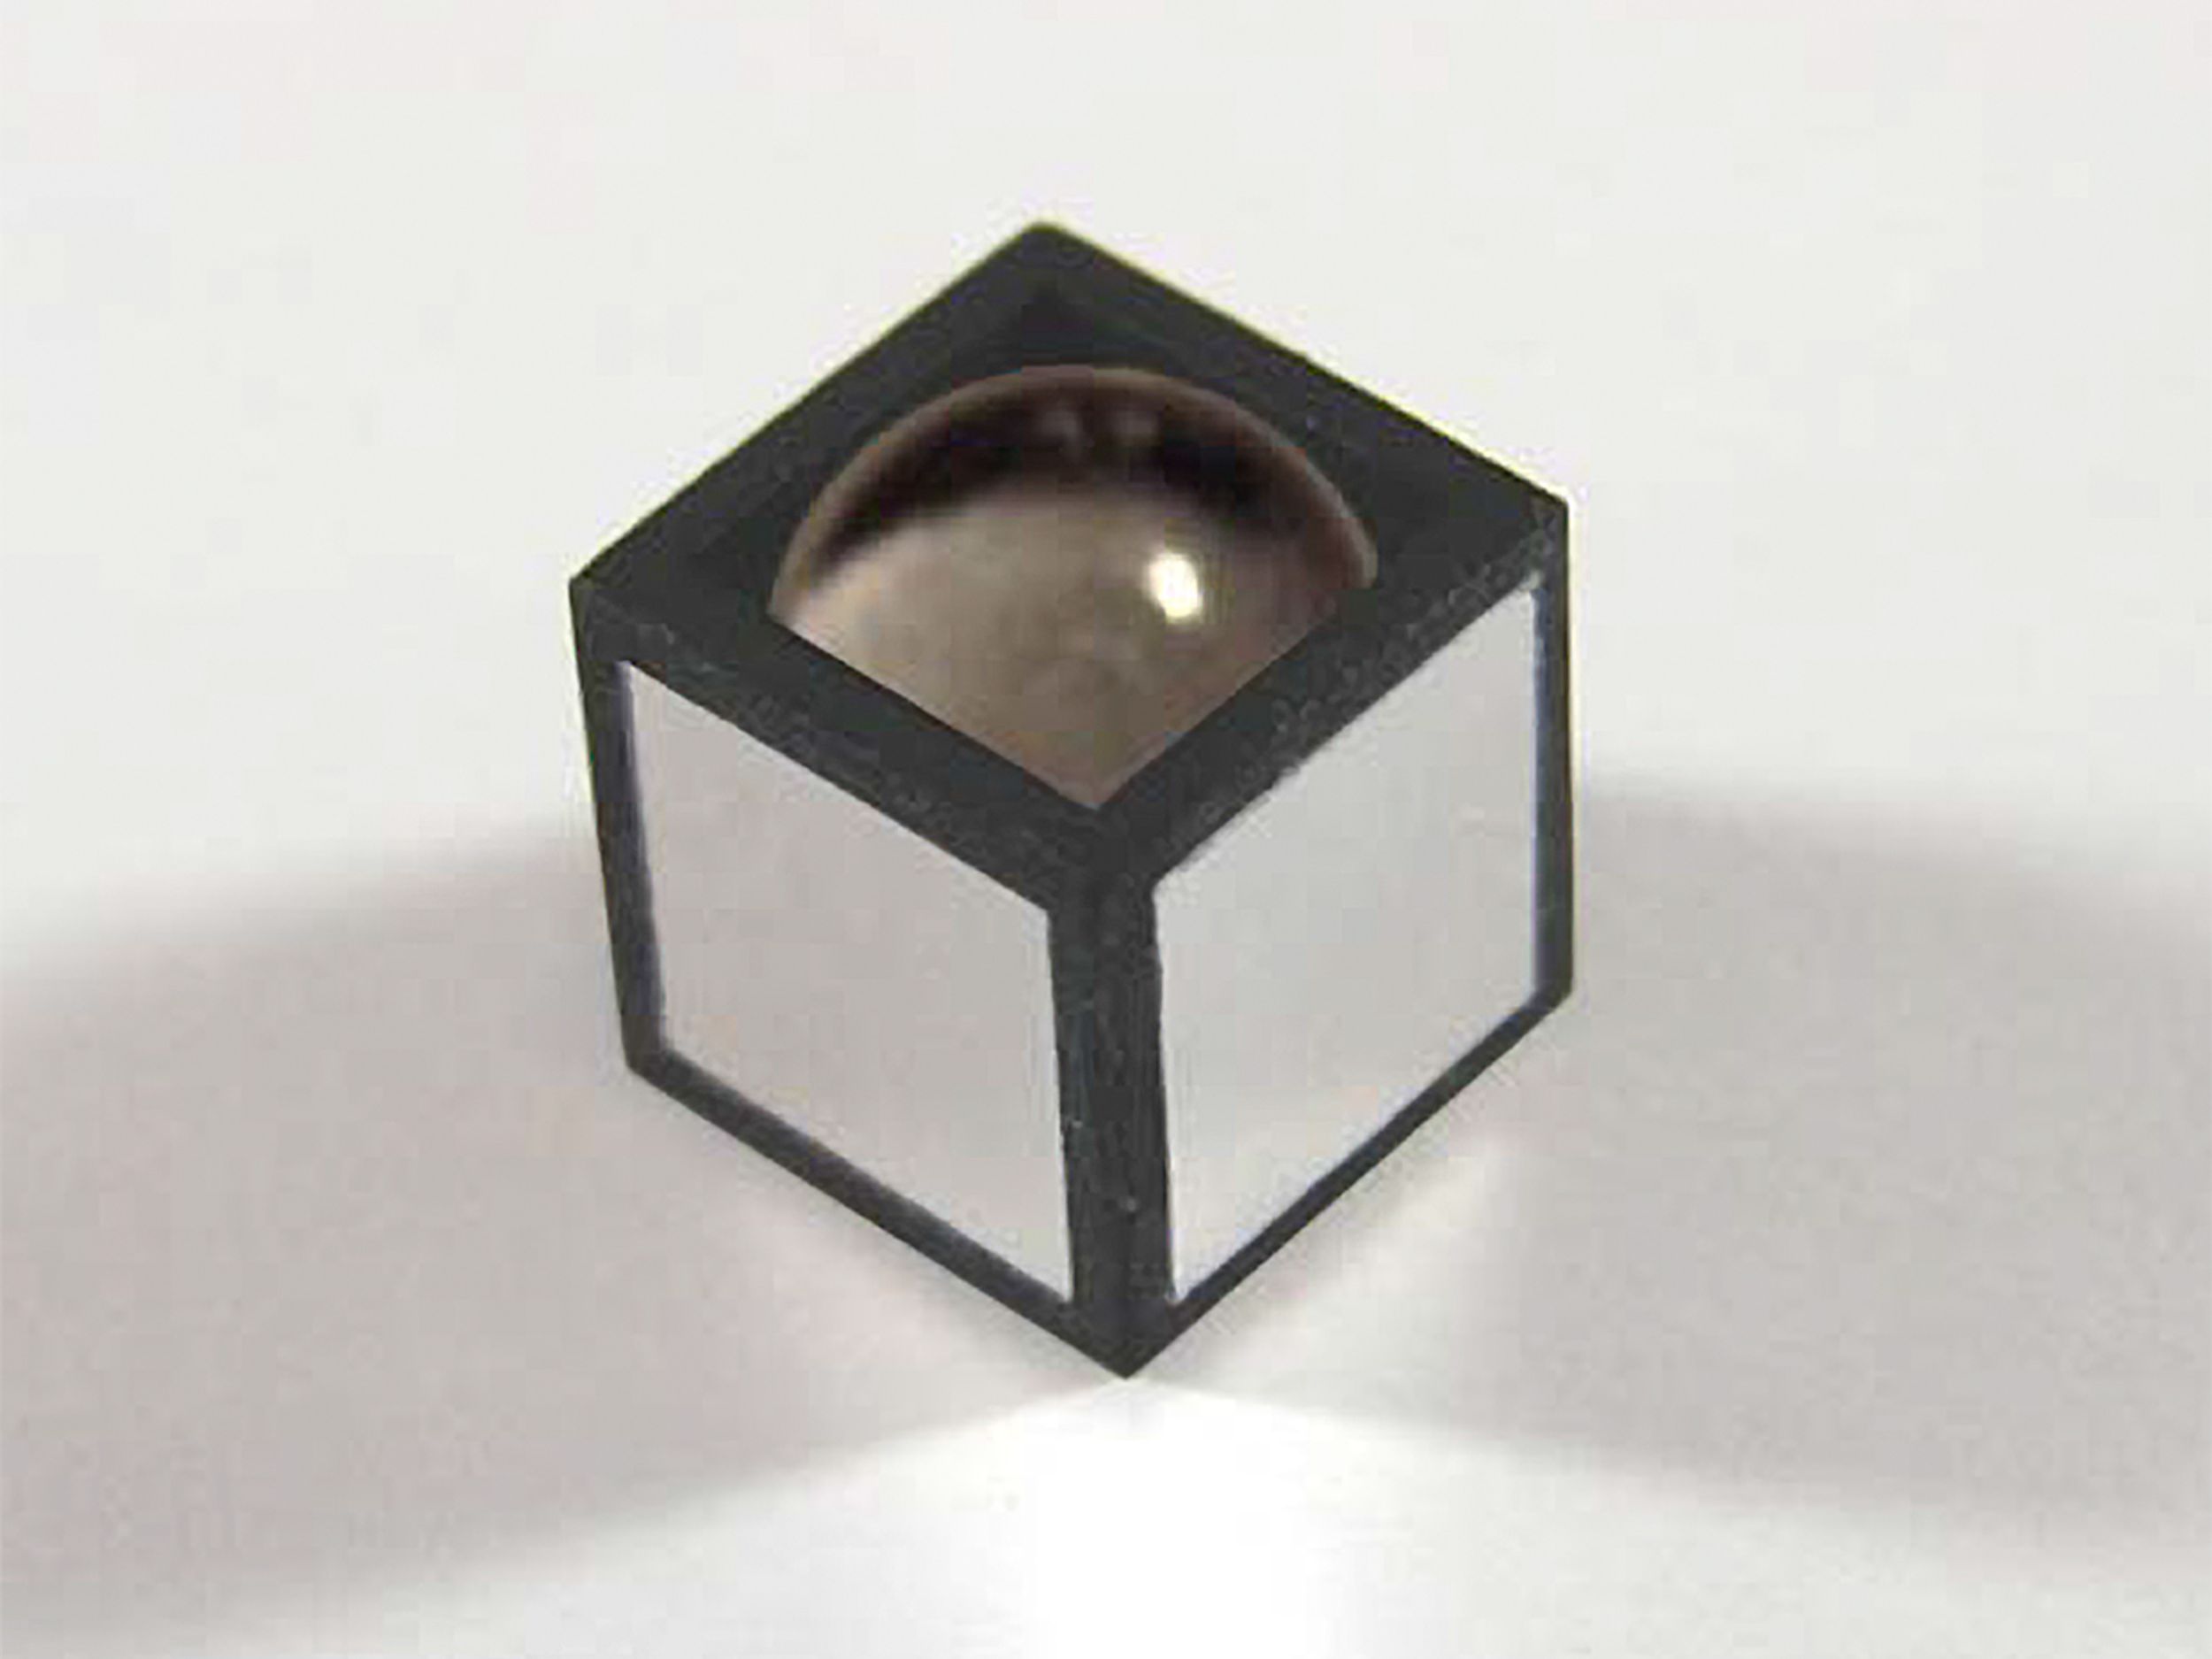 Photograph of the sensor, with the top electrode removed. It looks like a black and white cube with a drop of water bulging from the top. The dimensions are 3 × 3 × 3 mm.